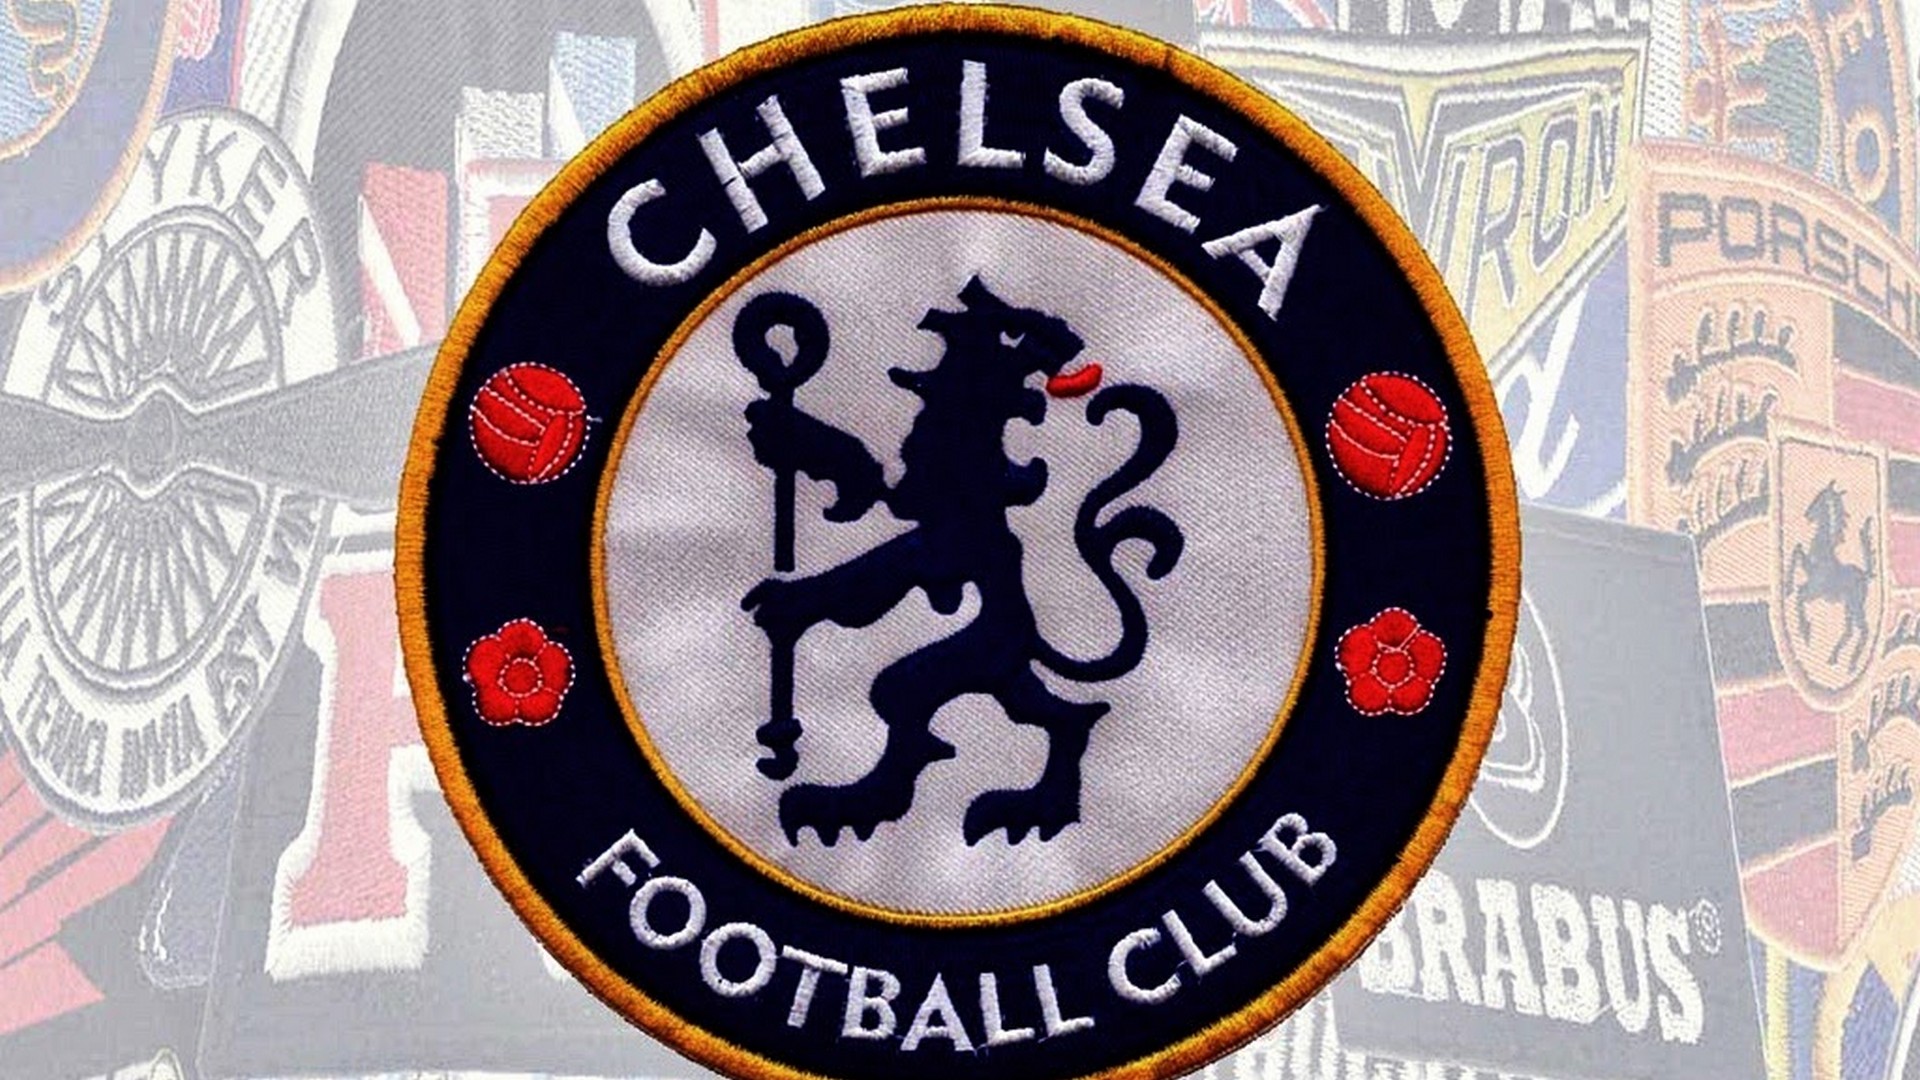 Chelsea Football Desktop Wallpapers with resolution 1920x1080 pixel. You can make this wallpaper for your Mac or Windows Desktop Background, iPhone, Android or Tablet and another Smartphone device